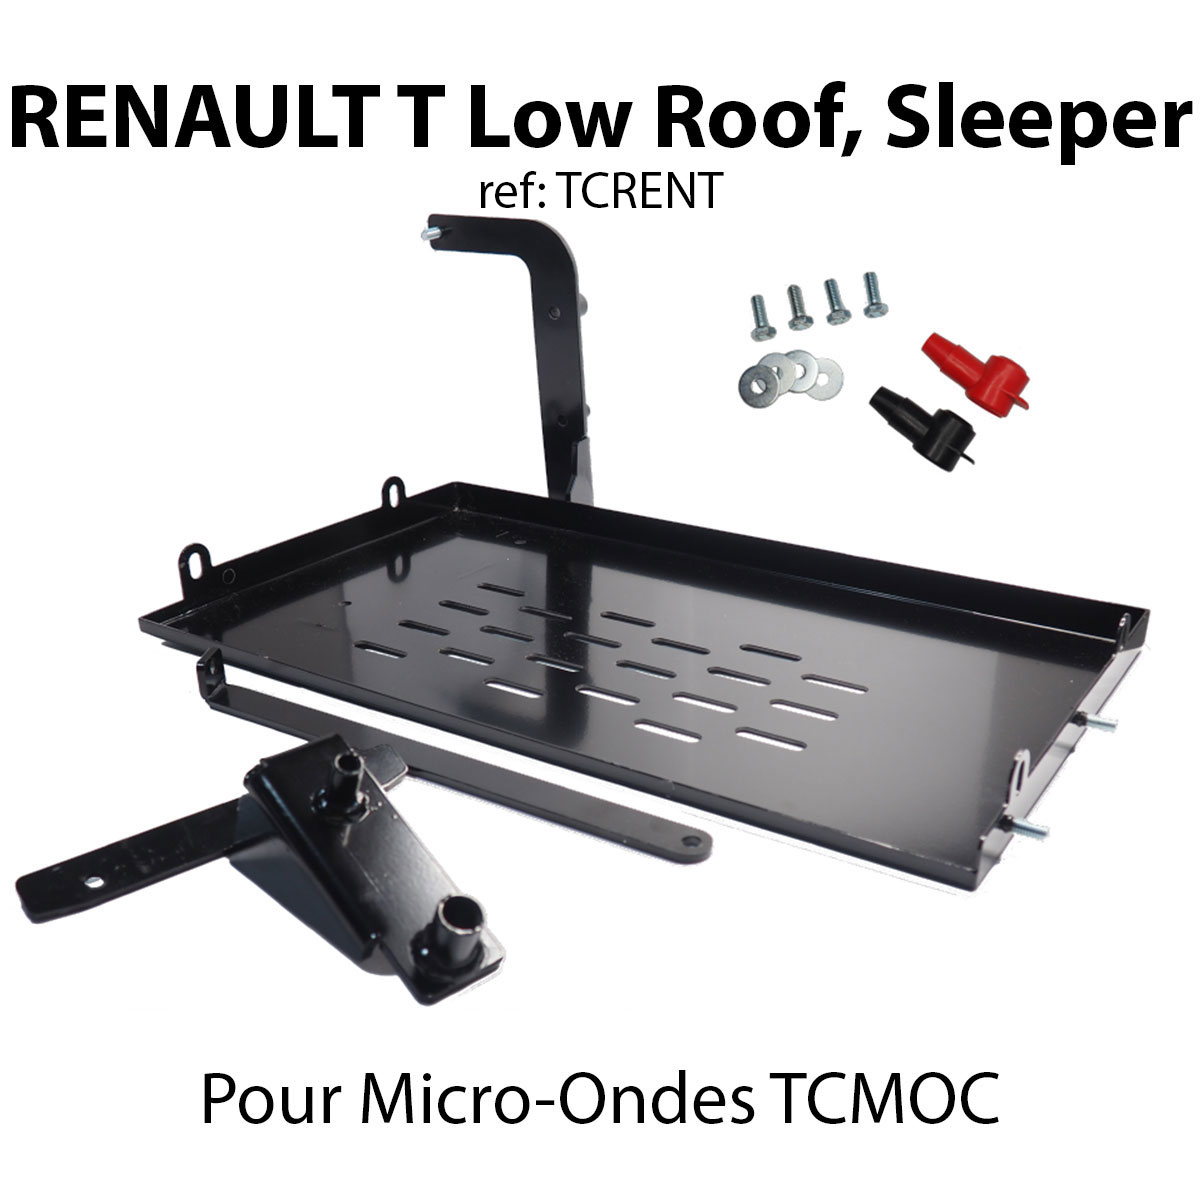 RENAULT T Low Roof, Sleeper (Kit de fixation Micro-ondes TCMOC)